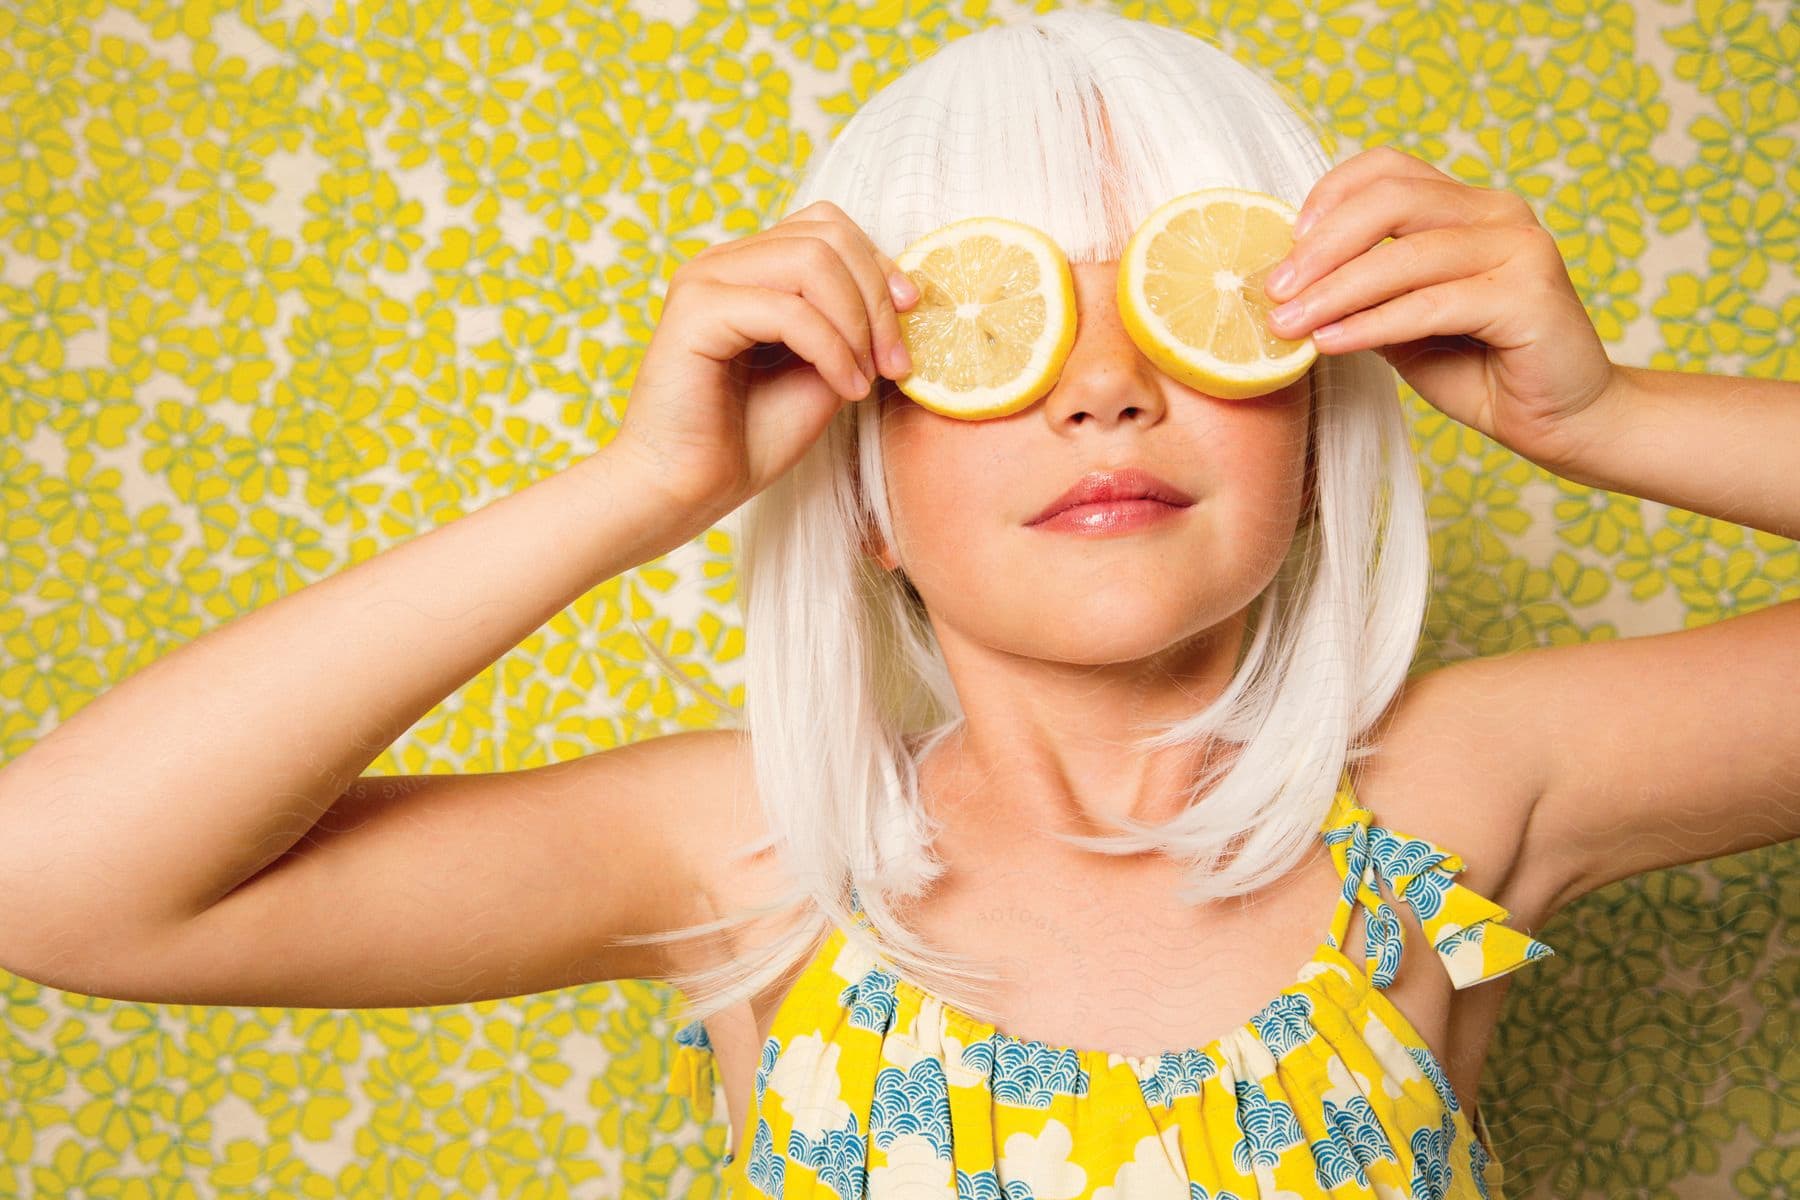 A child wearing a yellow dress holds lemon slices over her eyes